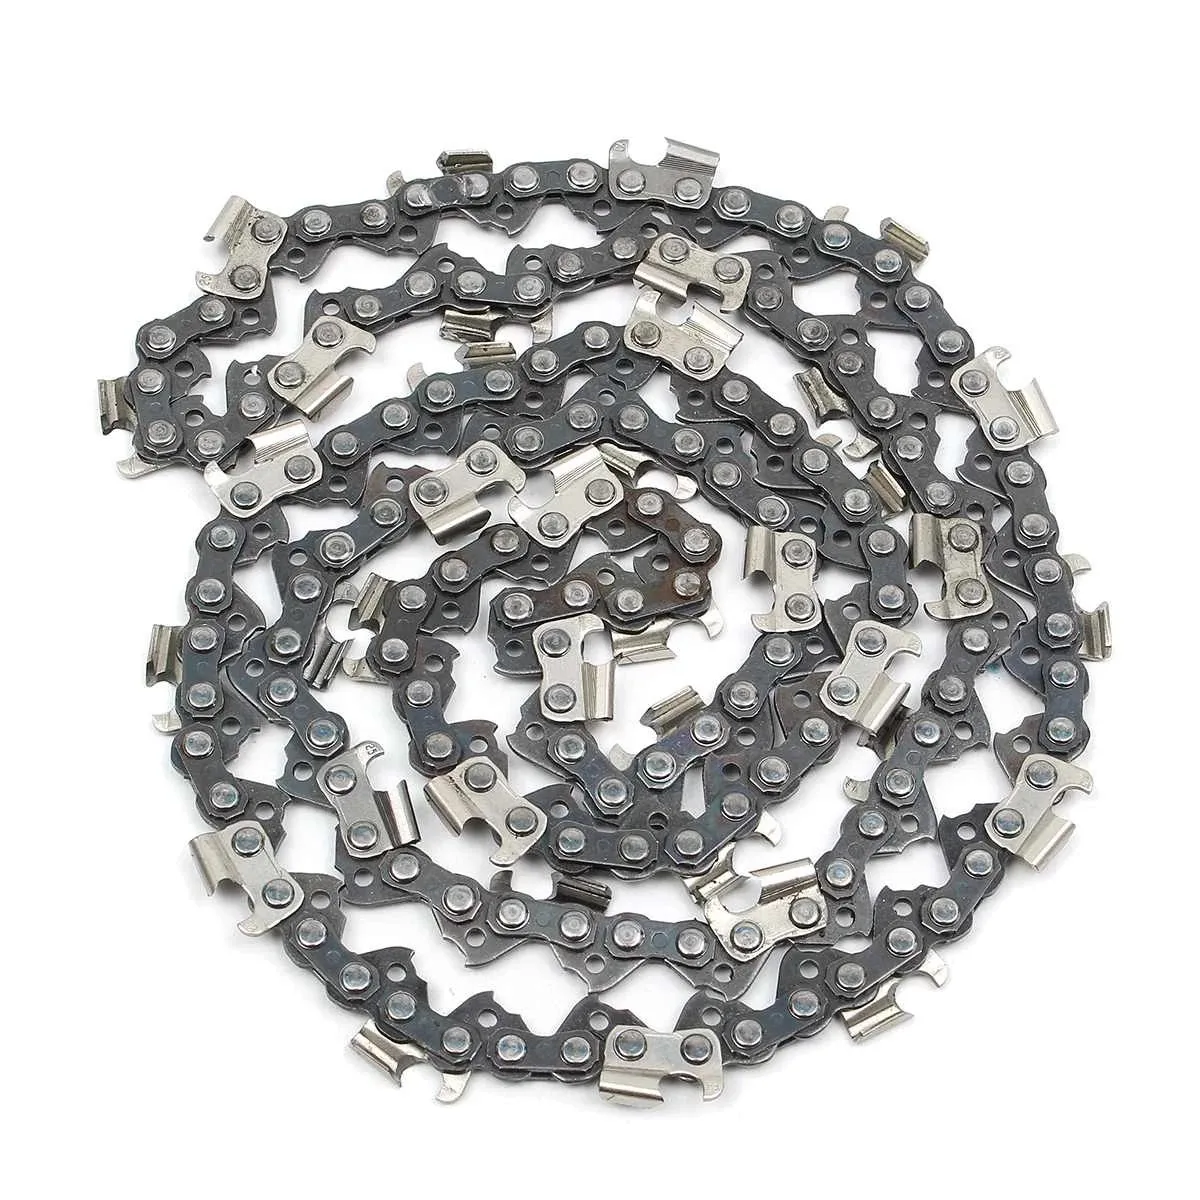 

3PCS Set 14 Inch Chain Saw Chain For Stihl MS170 MS180 And Others 3/8 .050 50DL Home Graden Supplies